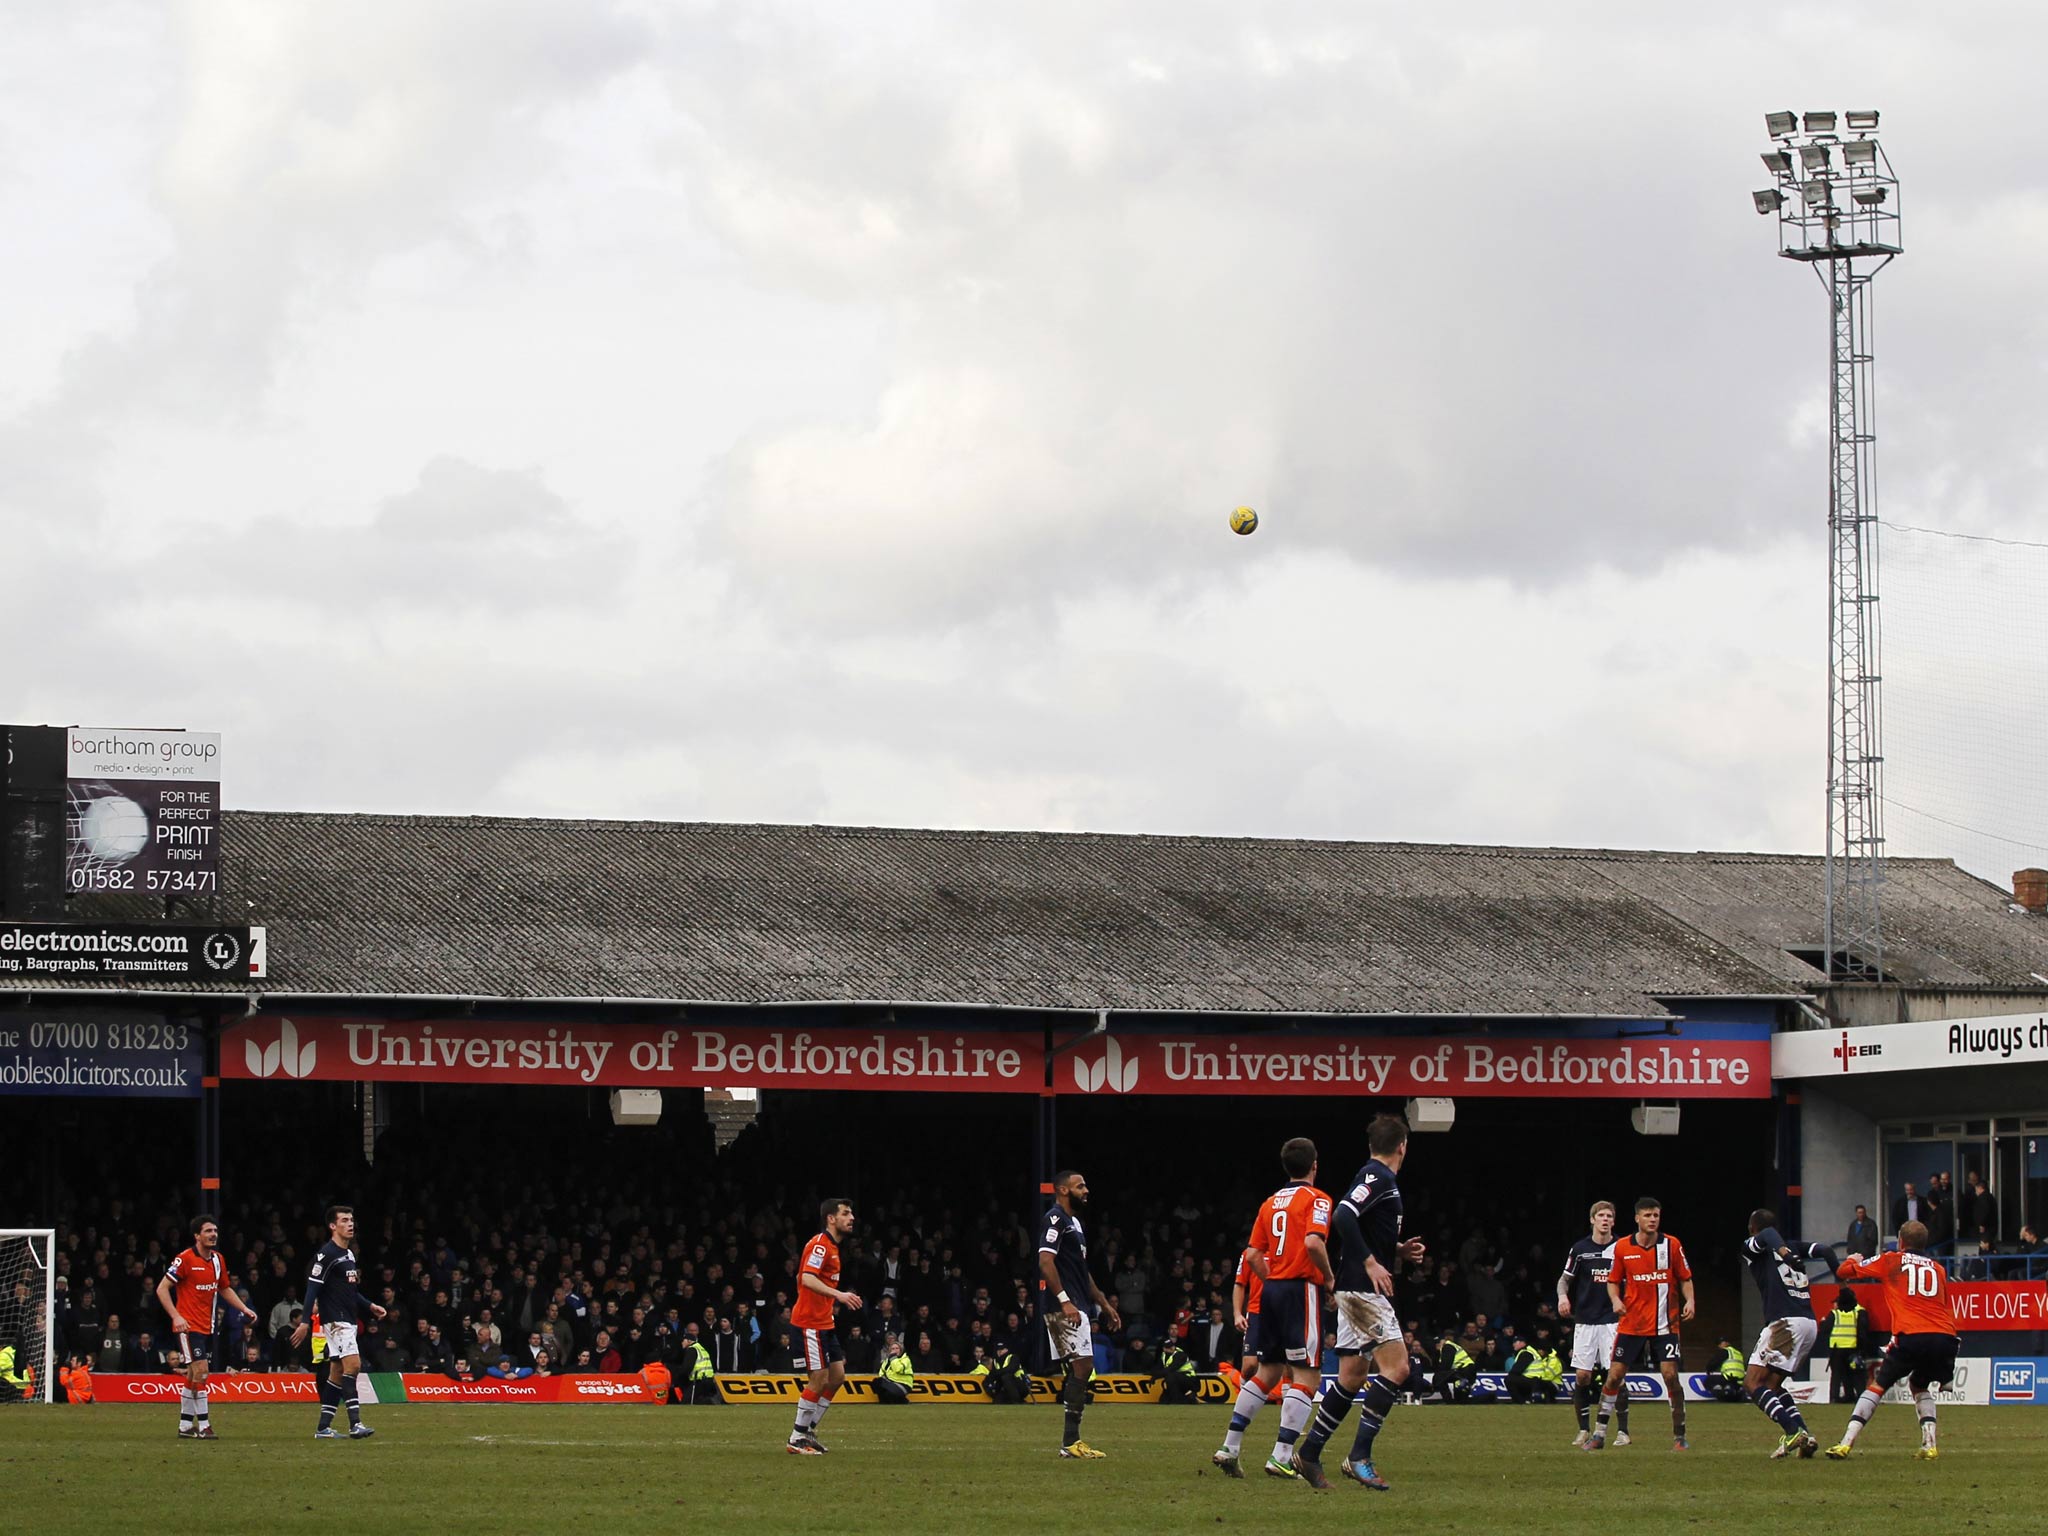 Luton Town have suffered three play-off defeats since relegation